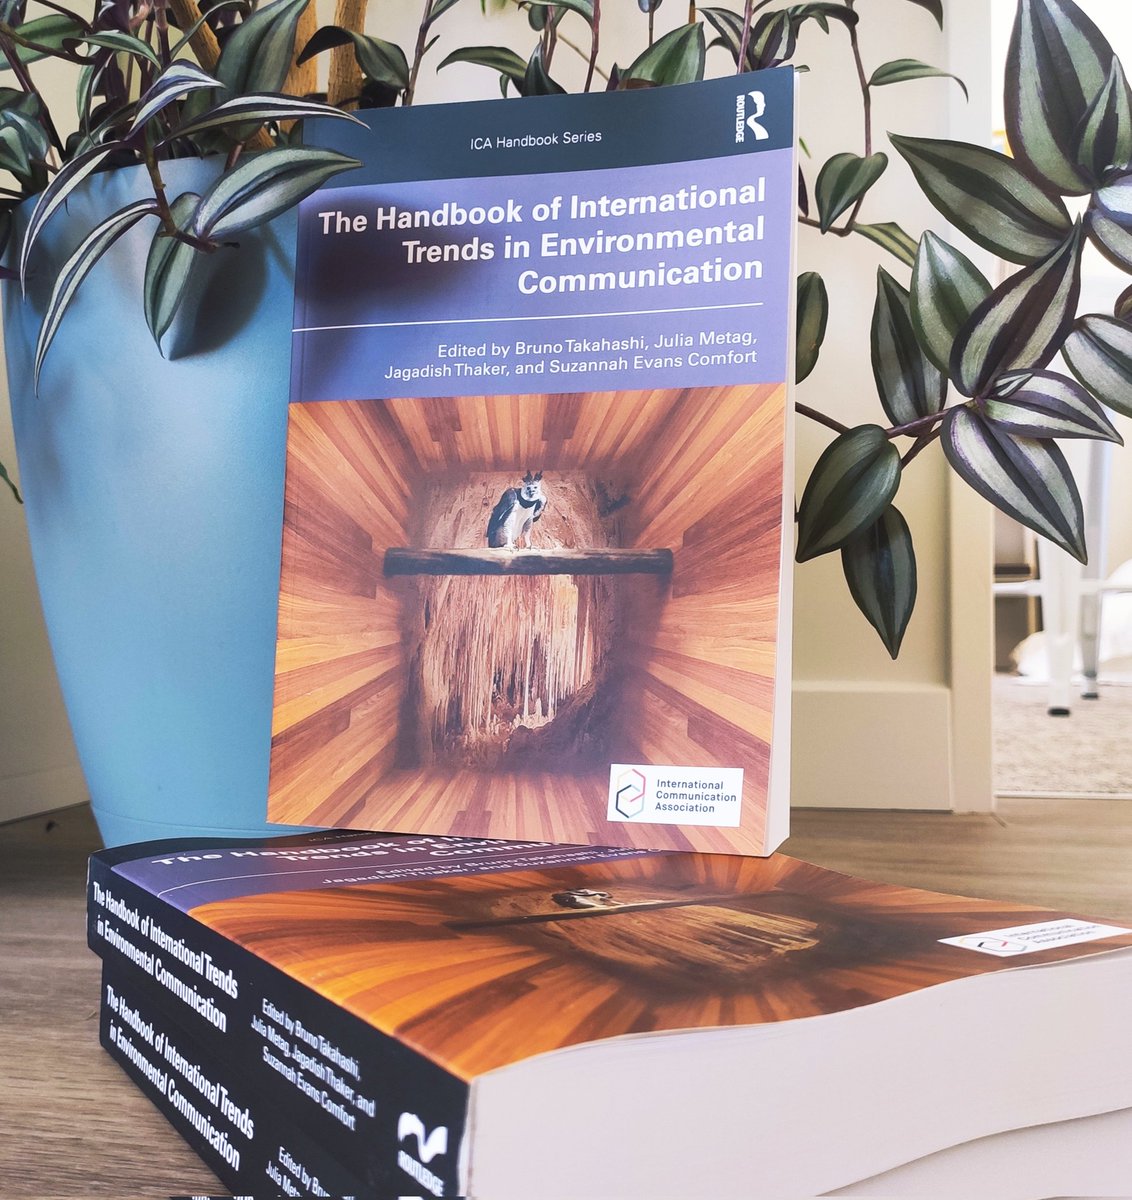 Thrilled to be part of @icahdq Handbook of International Trends in #EnvCom. Insightful analysis of the past, present, & future of Env Comm from top scholars across the world 🧵 @tandfonline #scicomm #healthcomm #Communication routledge.com/The-Handbook-o… shorturl.at/ltGL6